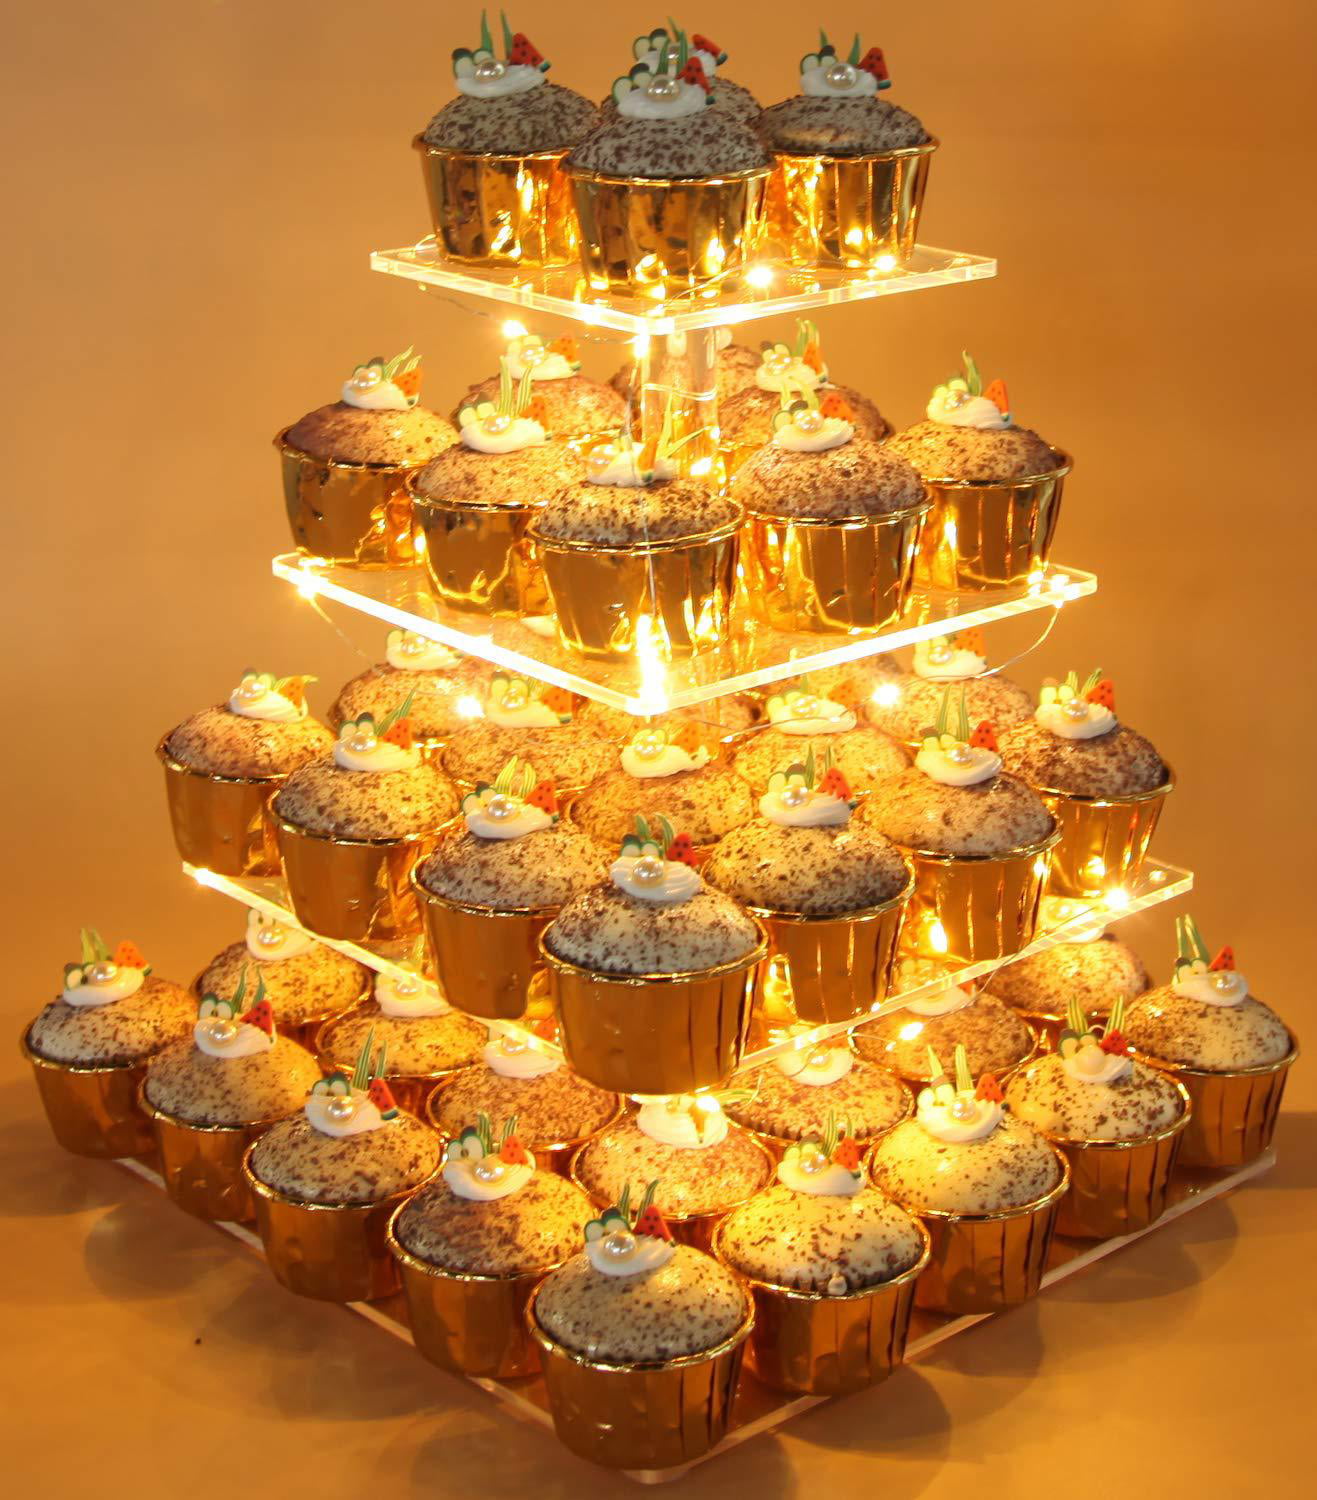 4 Tier Cupcake Stand Cake Tower Holder Wedding Party Display W/ LED String Light